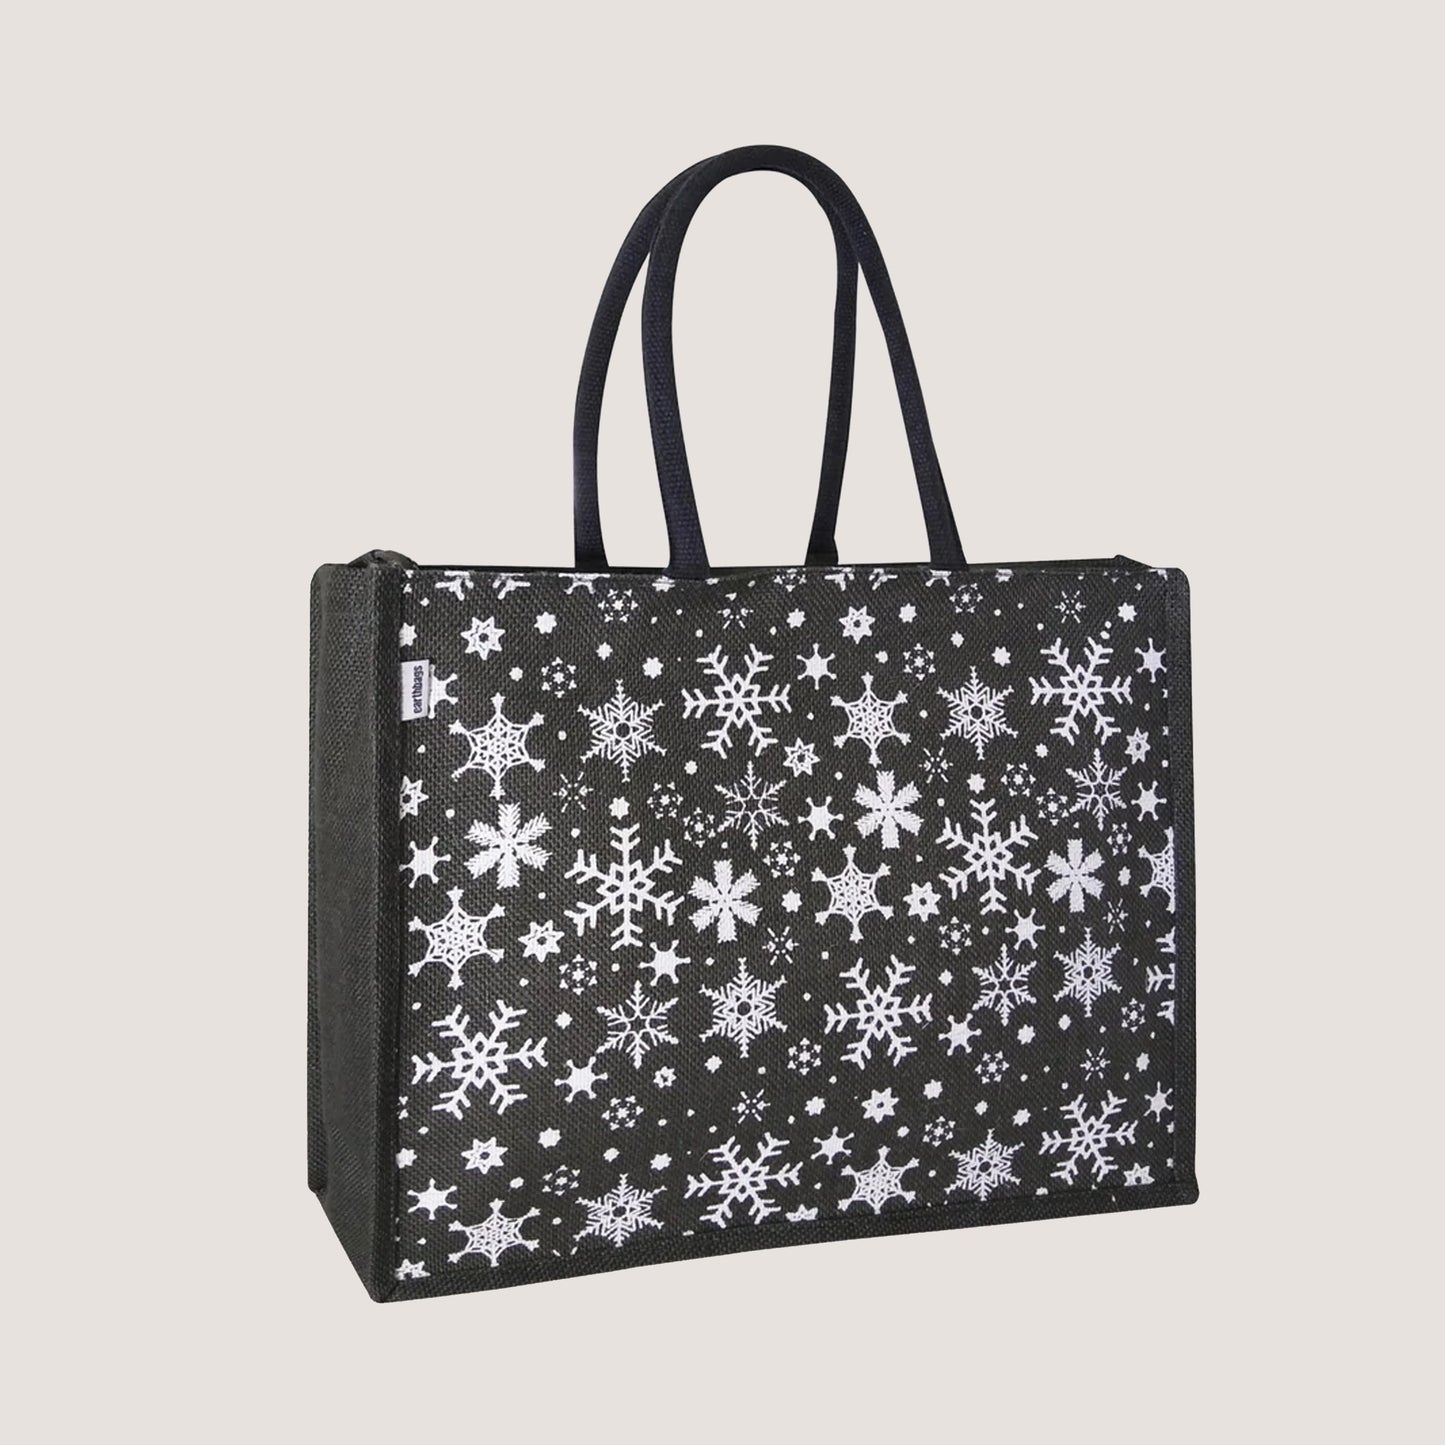 EARTHBAGS Snowflakes Printed Jute Shopping Bag with Zipper